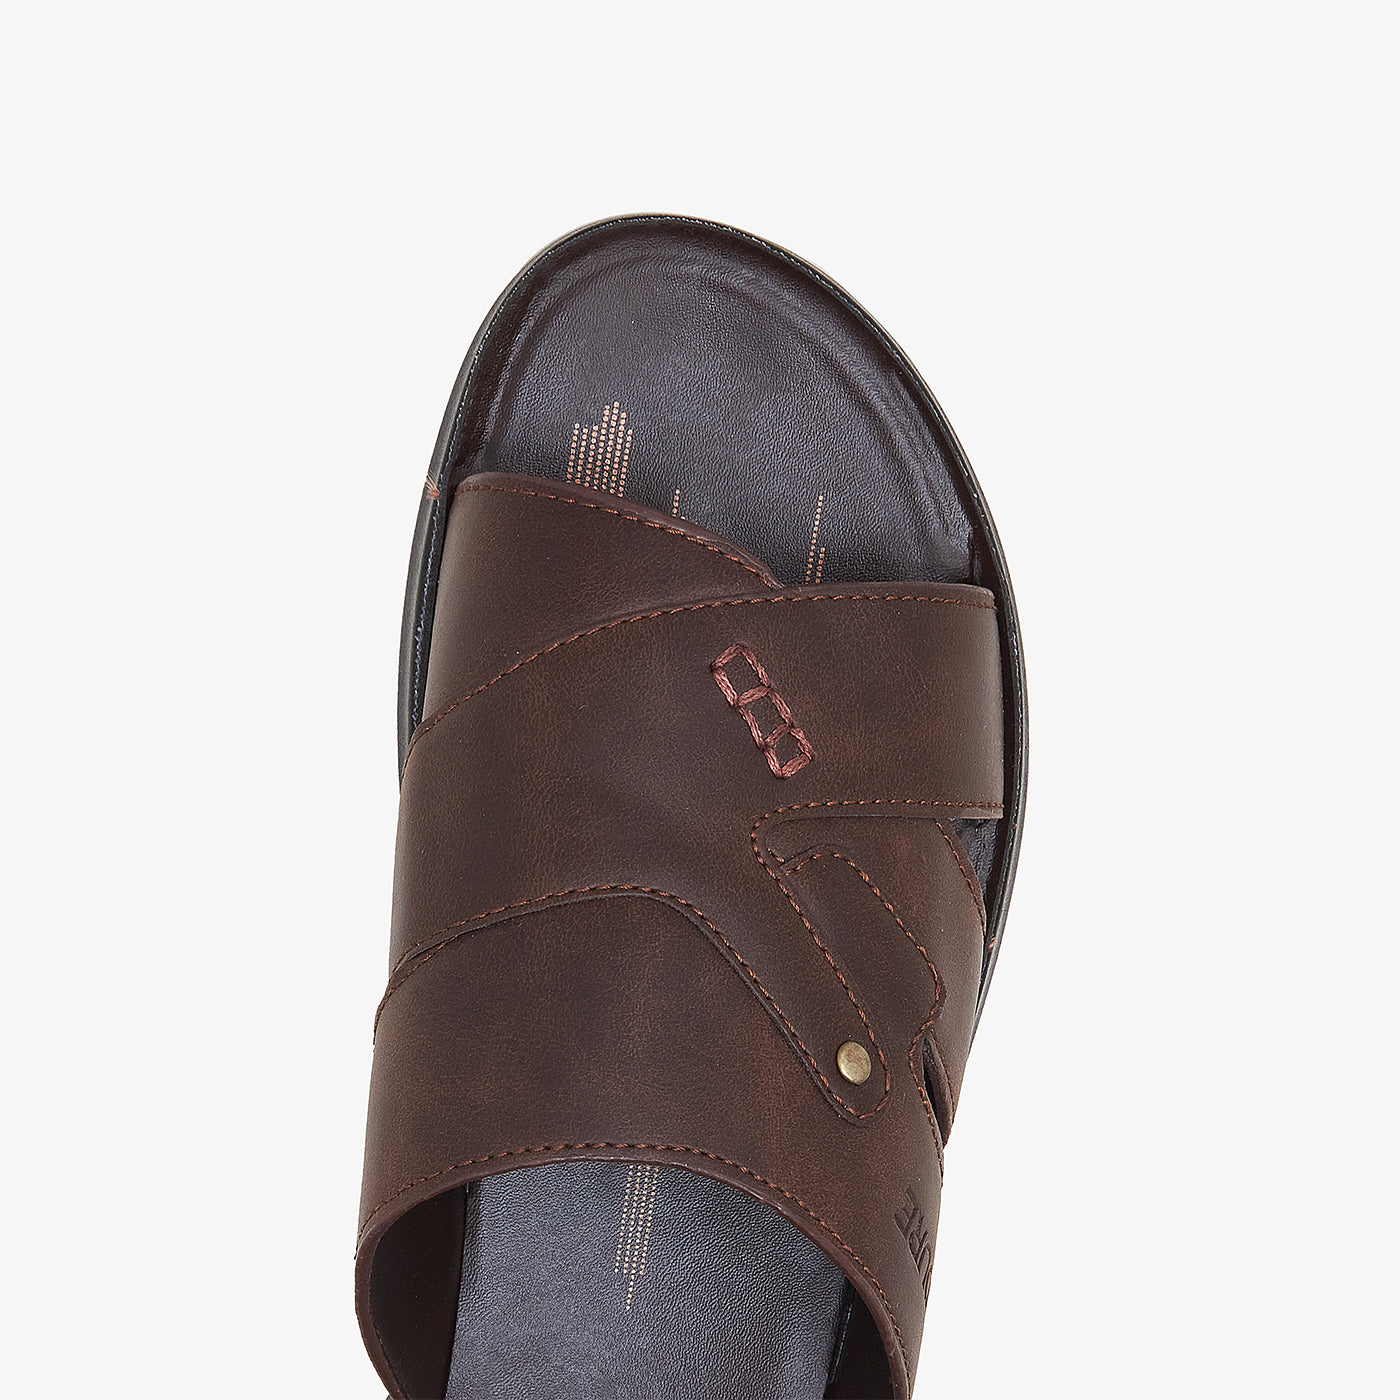 Fashionable Chappals for Men